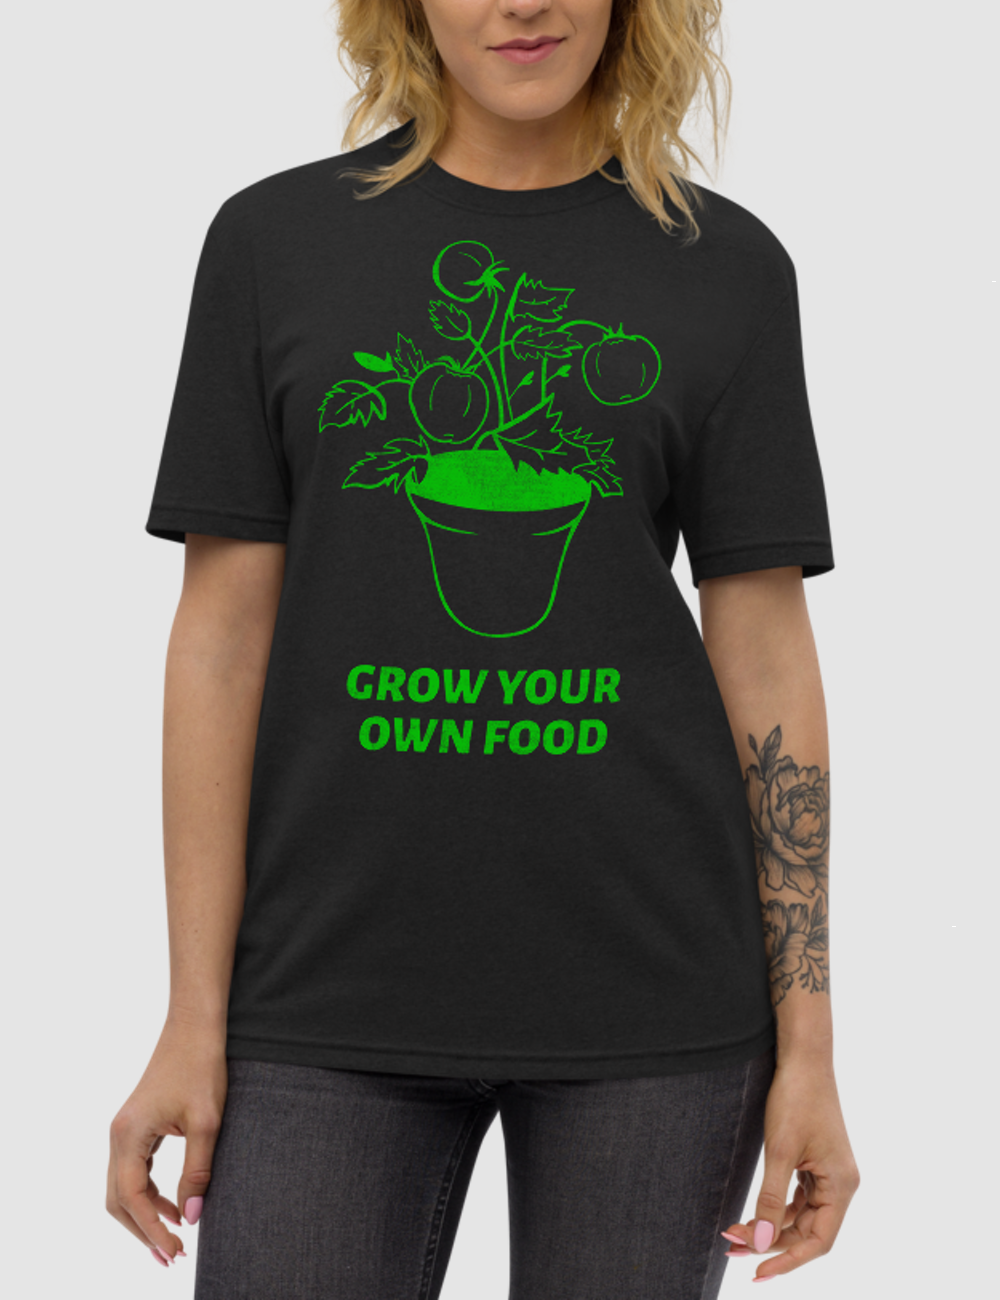 Grow Your Own Food | Unisex Recycled T-Shirt OniTakai